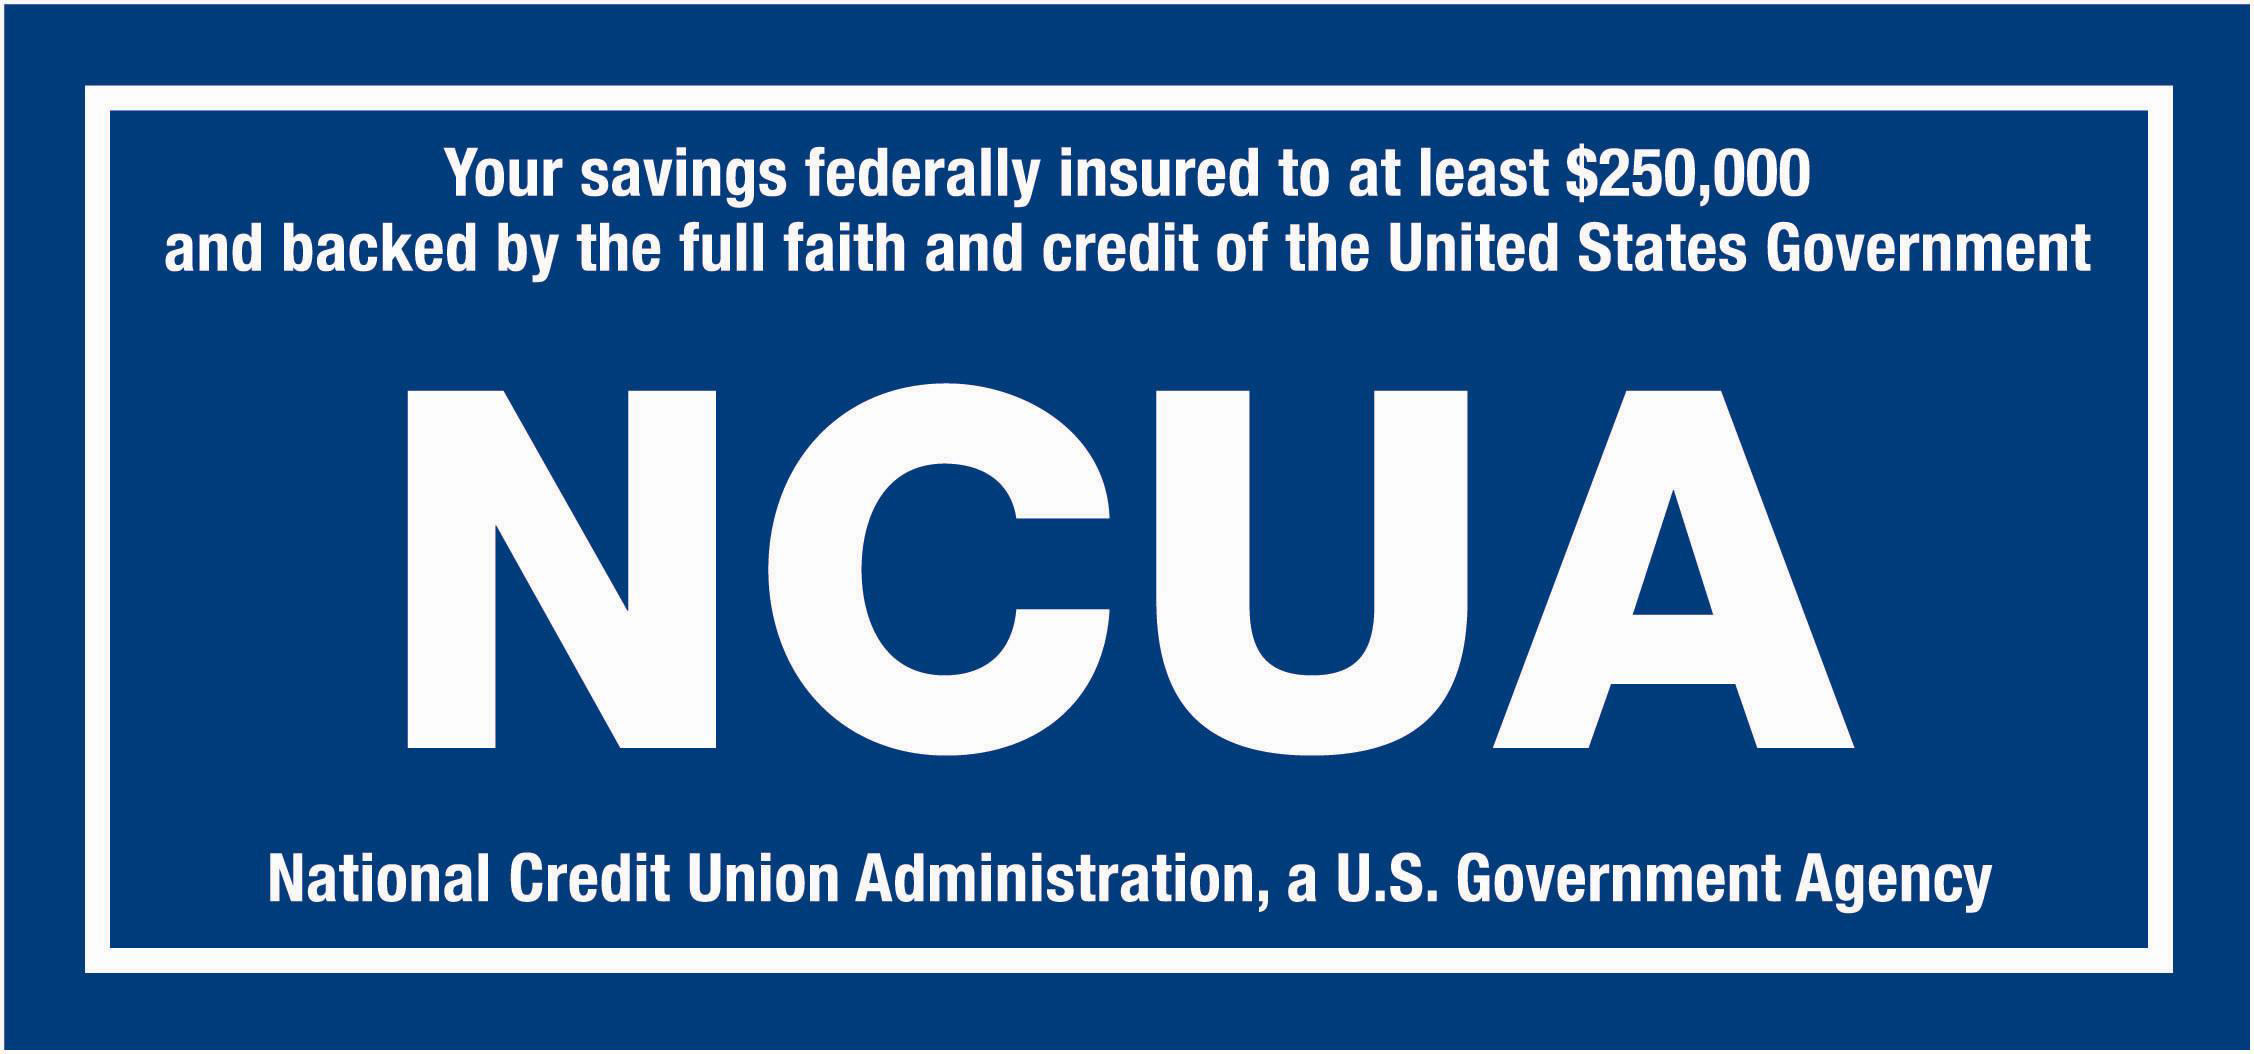 Your savings federally insured up to $250,000 and backed by the full faith and credit of the United States government.  NCUA.  National Credit Union Administration, a U.S. Government Agency